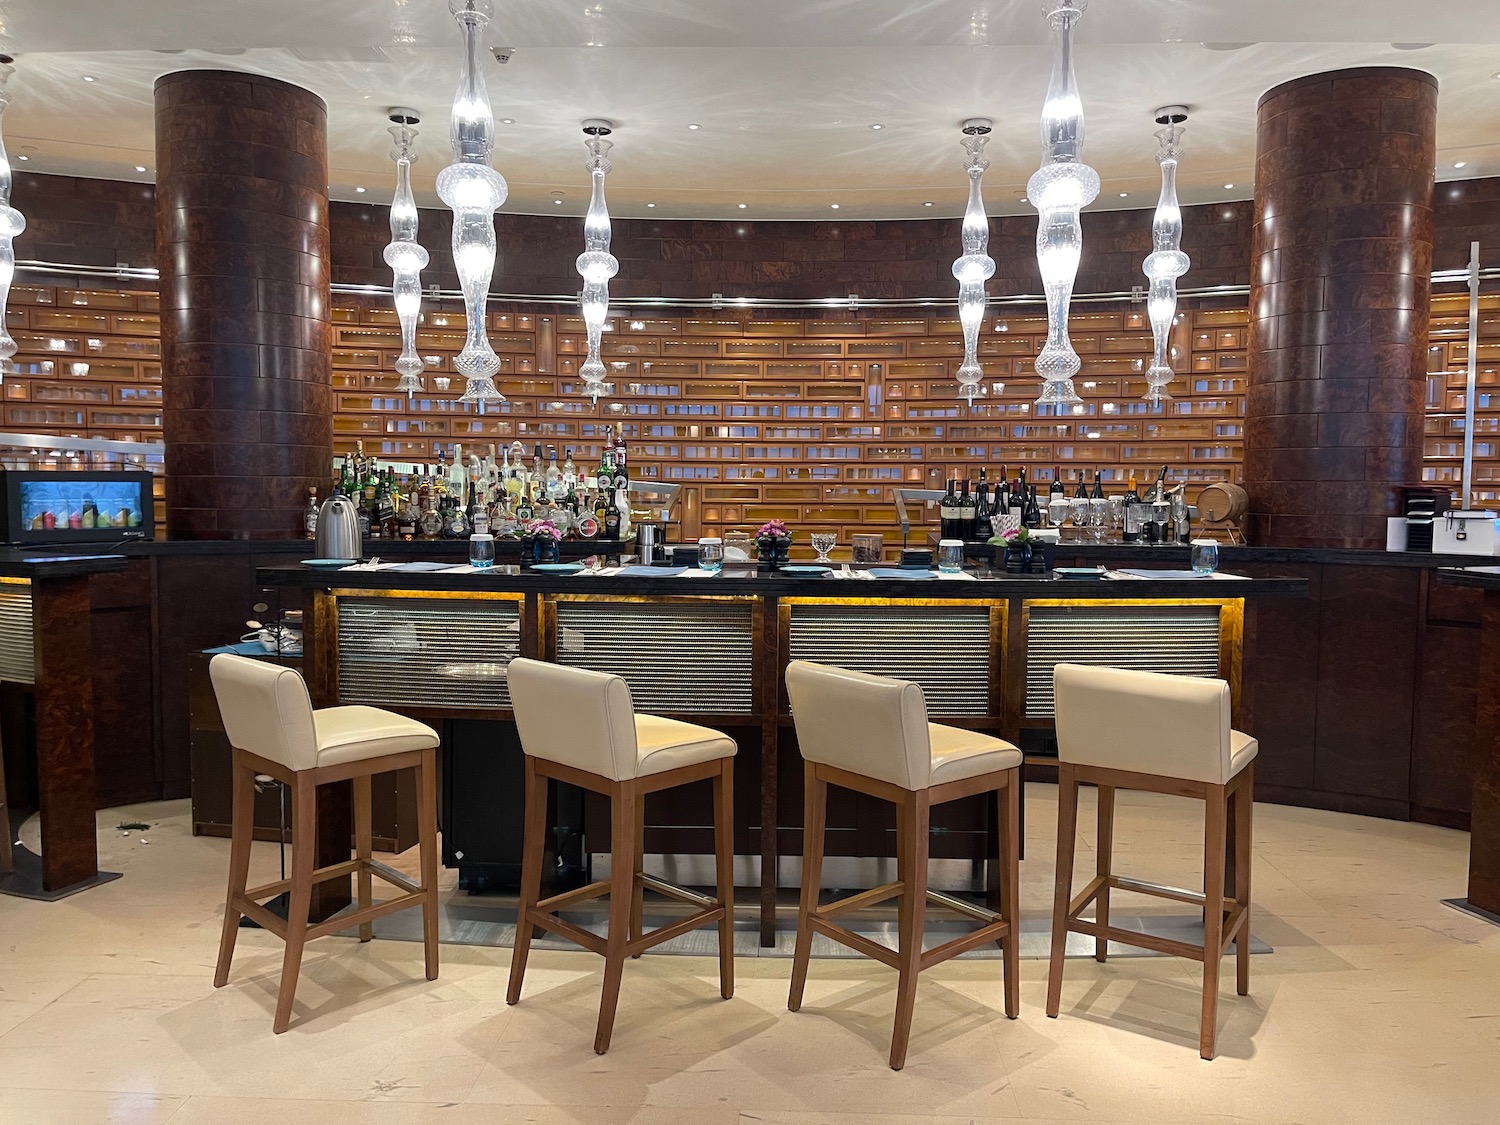 a bar with chairs and a bar with lights from the ceiling